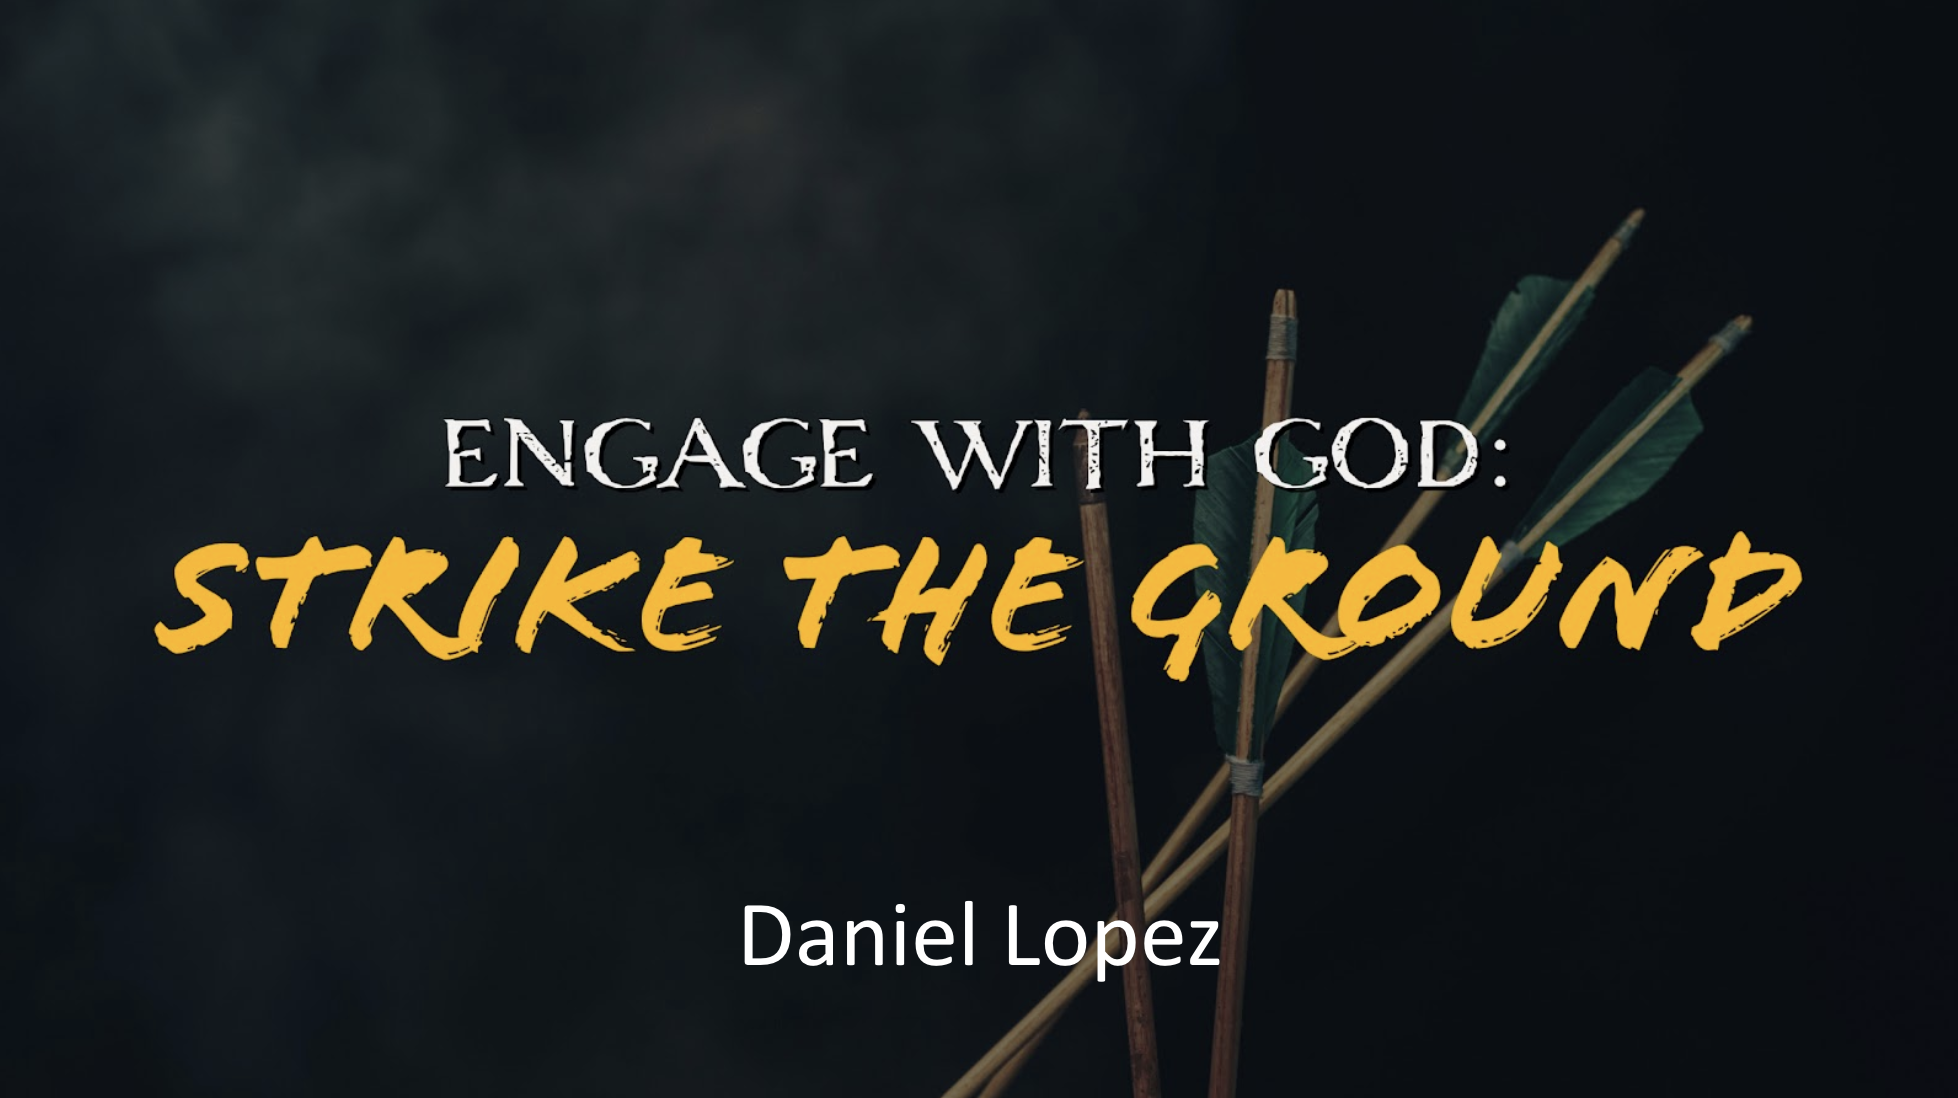 ENGAGE WITH GOD: Strike the Ground